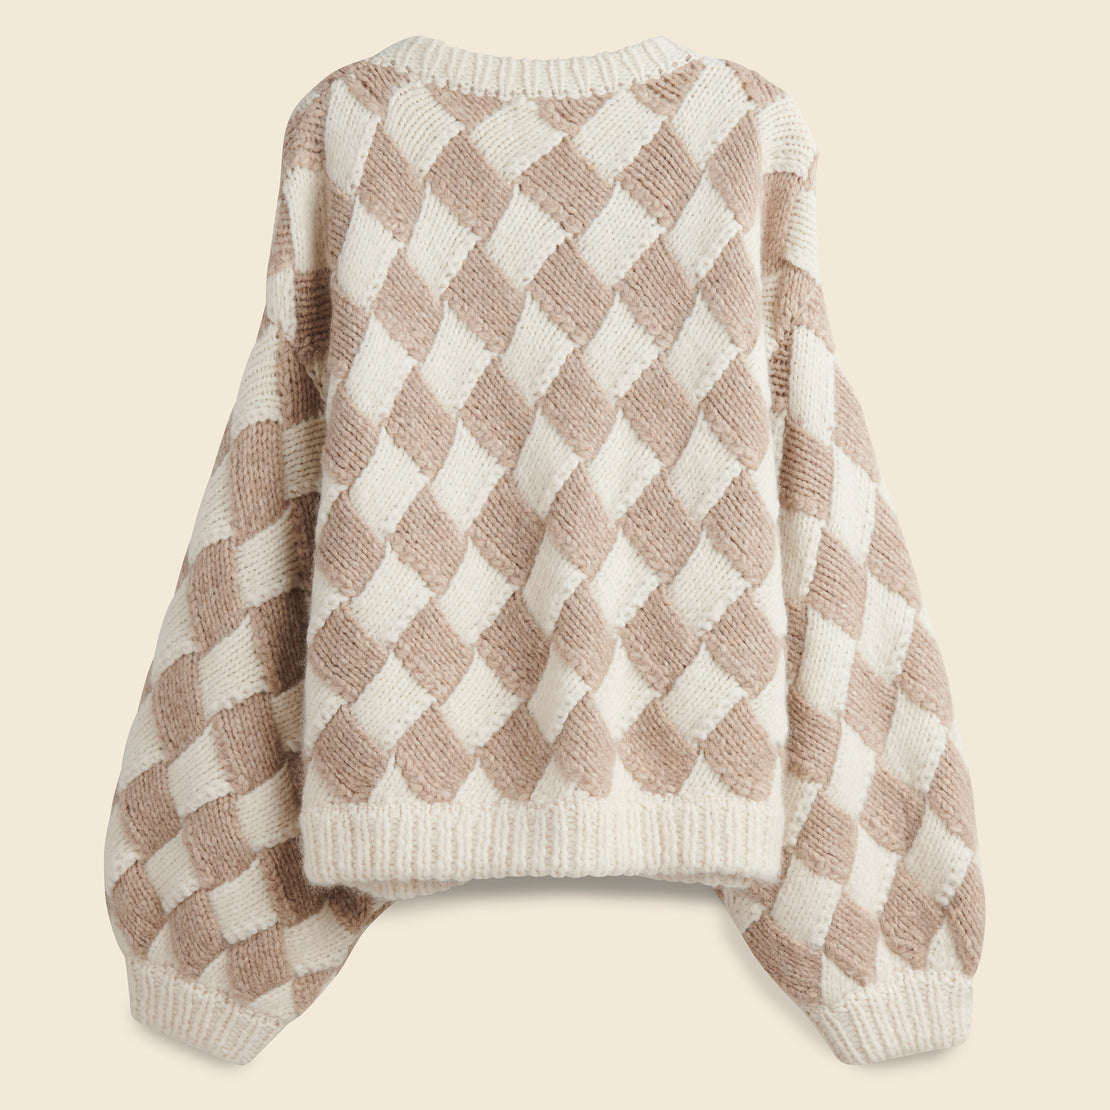 Balloon Sleeve Entrelac Sweater - Cream/Oatmeal - Atelier Delphine - STAG Provisions - W - Tops - Sweater